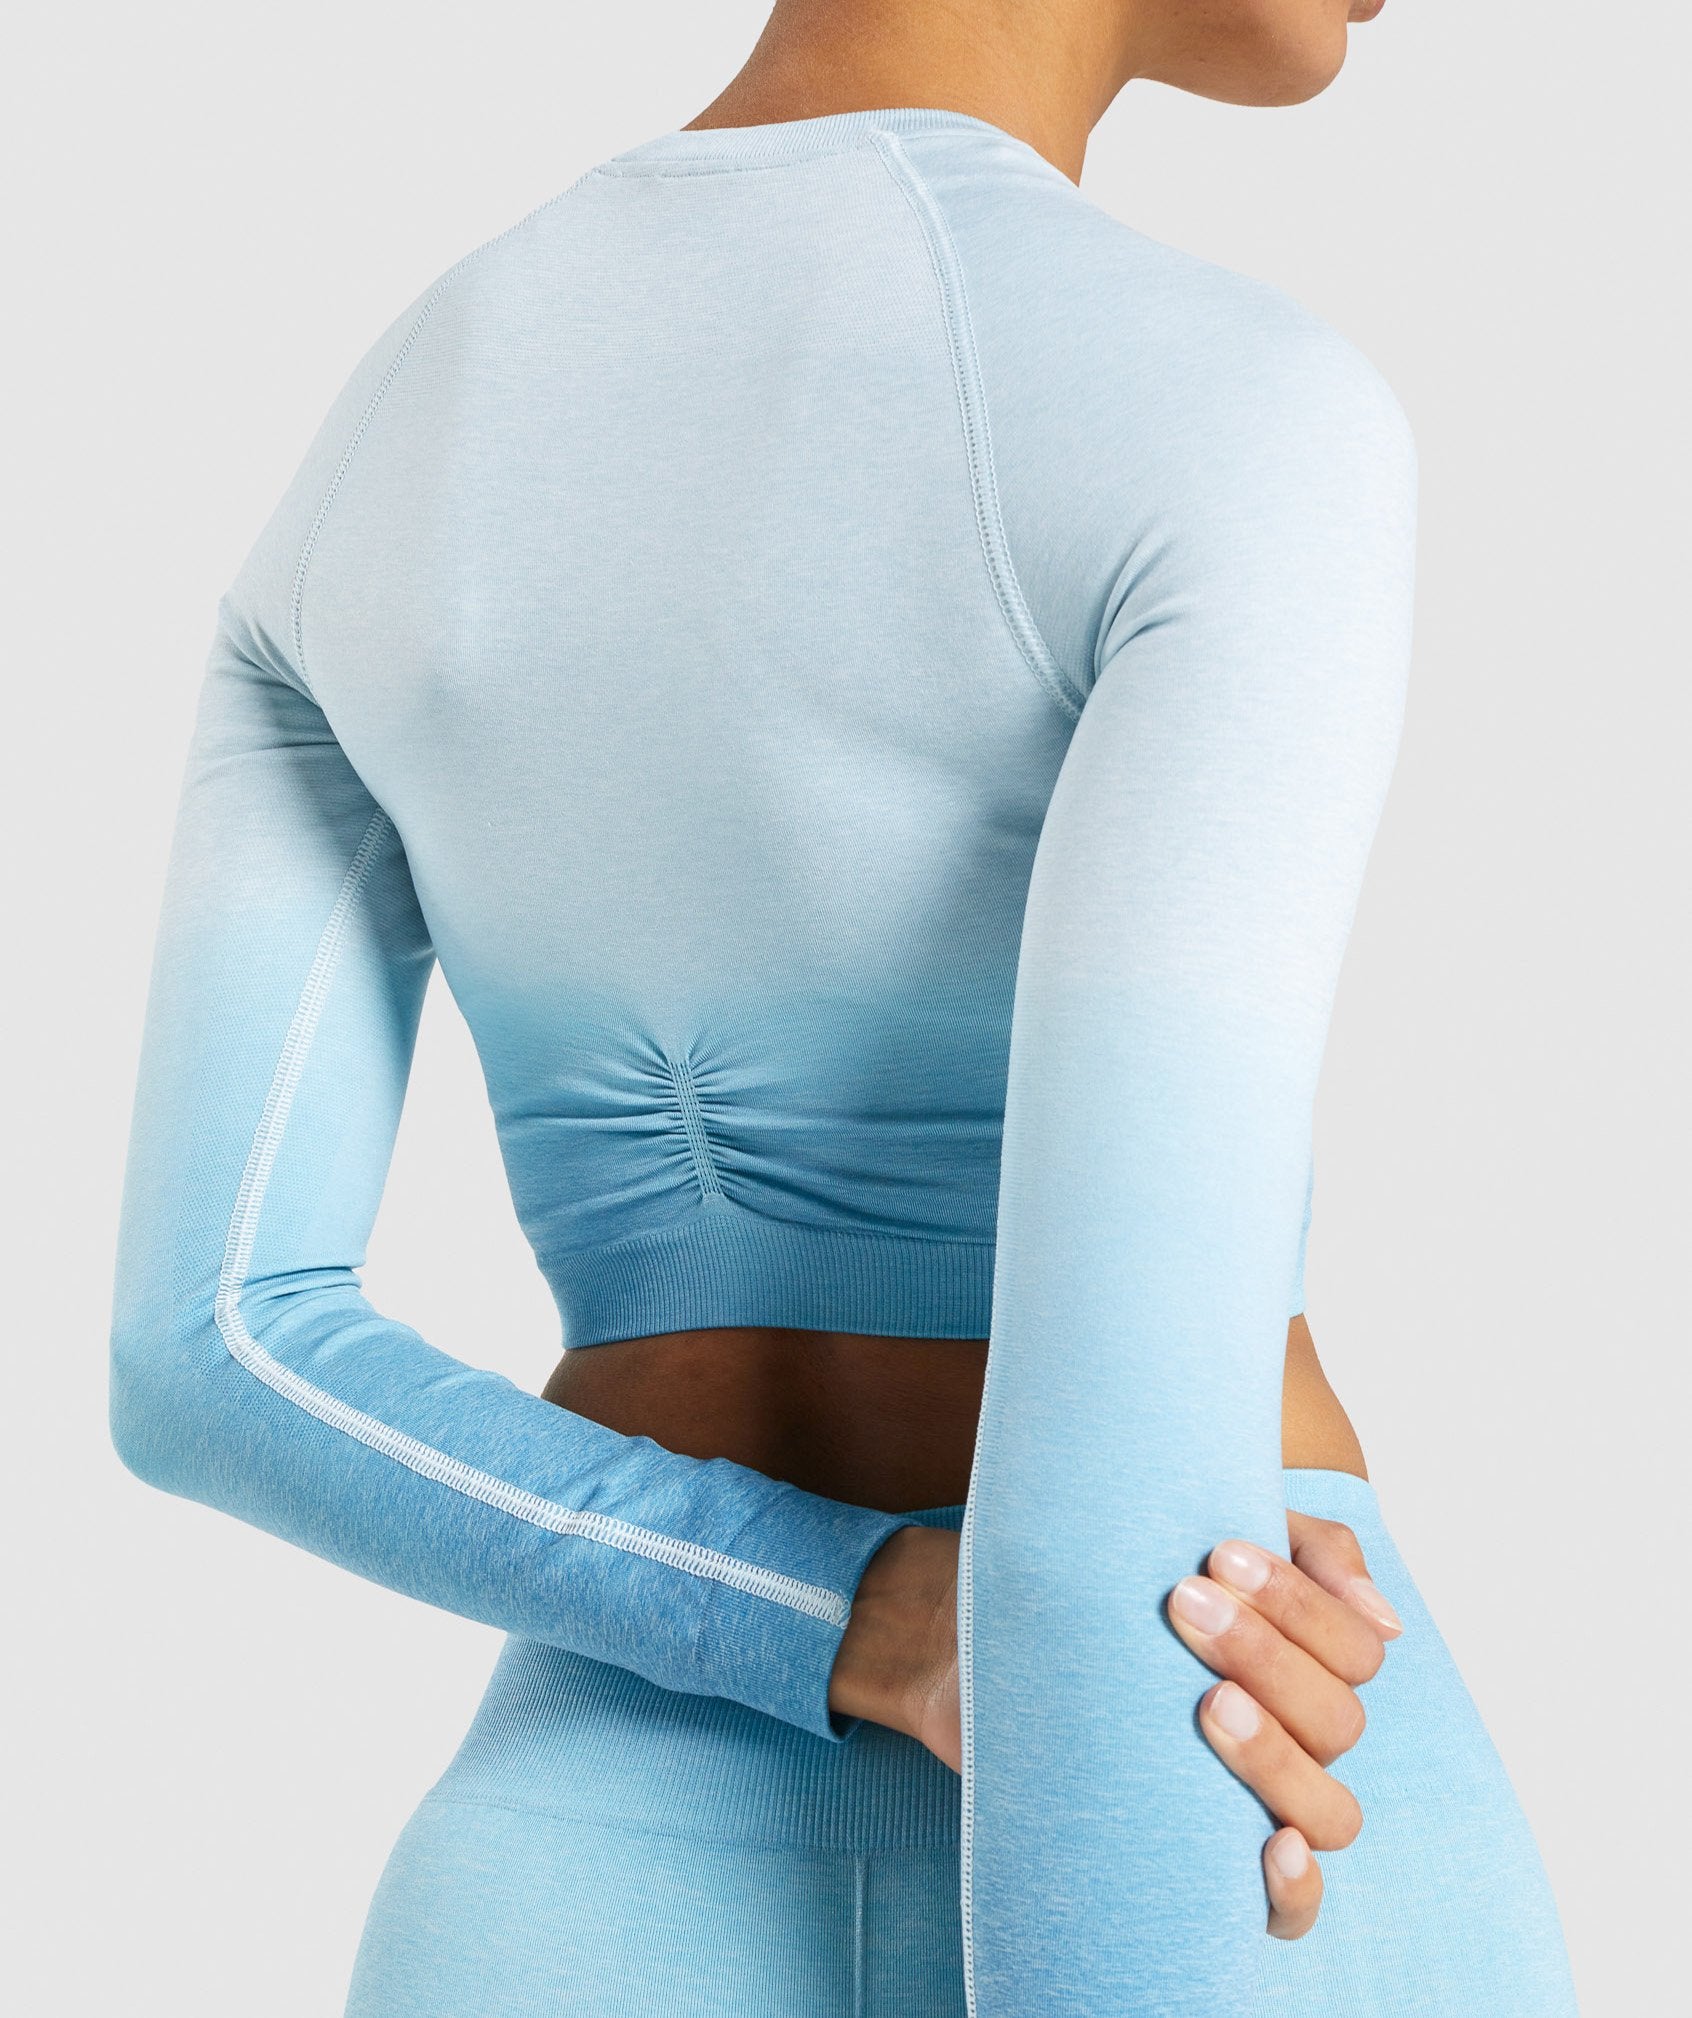 Gymshark Adapt Ombre Seamless Leggings and Long Sleeve Crop Top